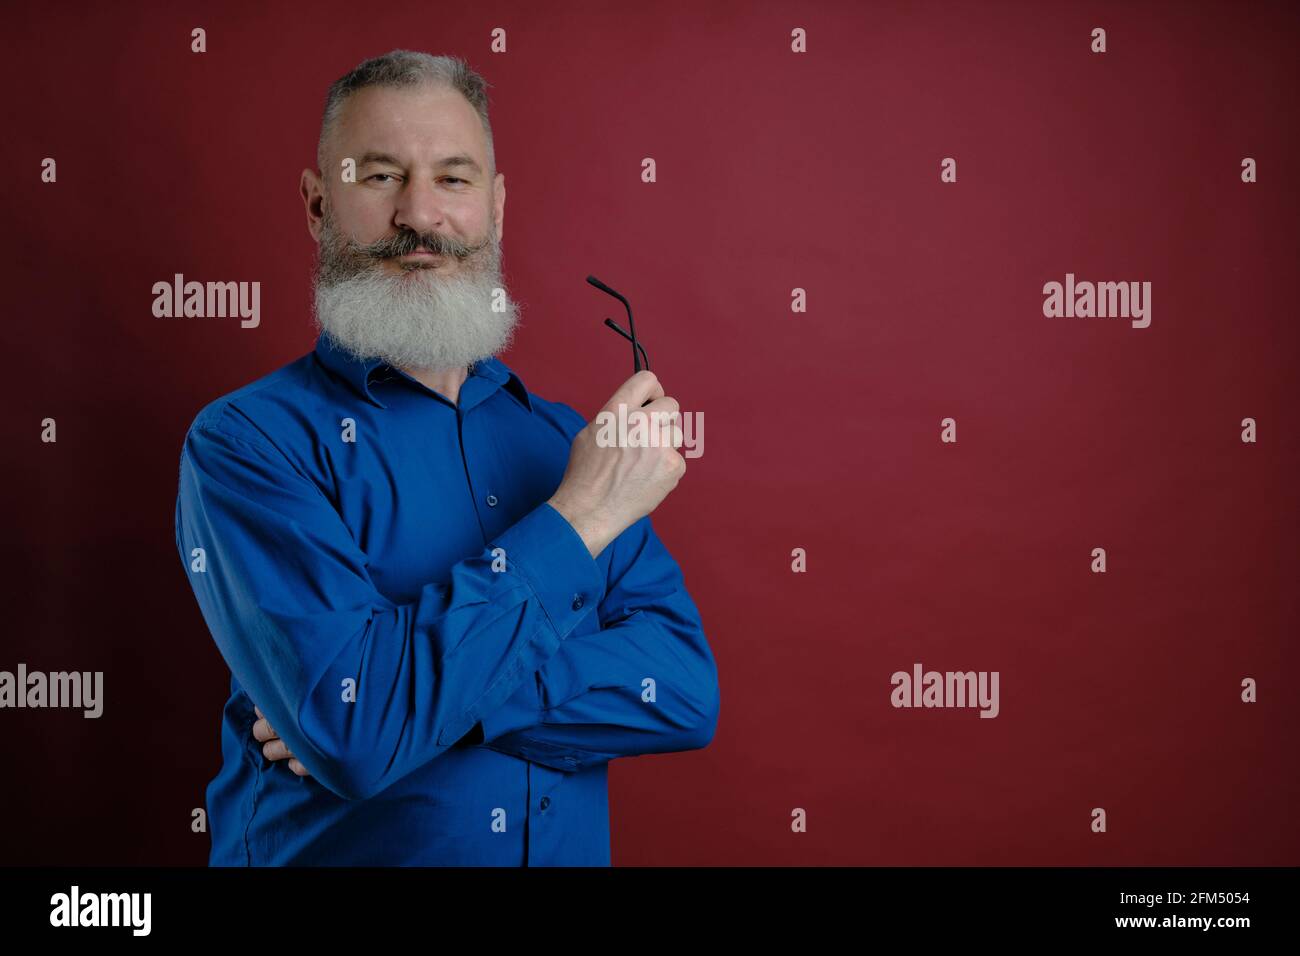 Mature bearded caucasian man dressed blue shirt looks confident at camera with eyeglasses in hand, red backdrop Stock Photo